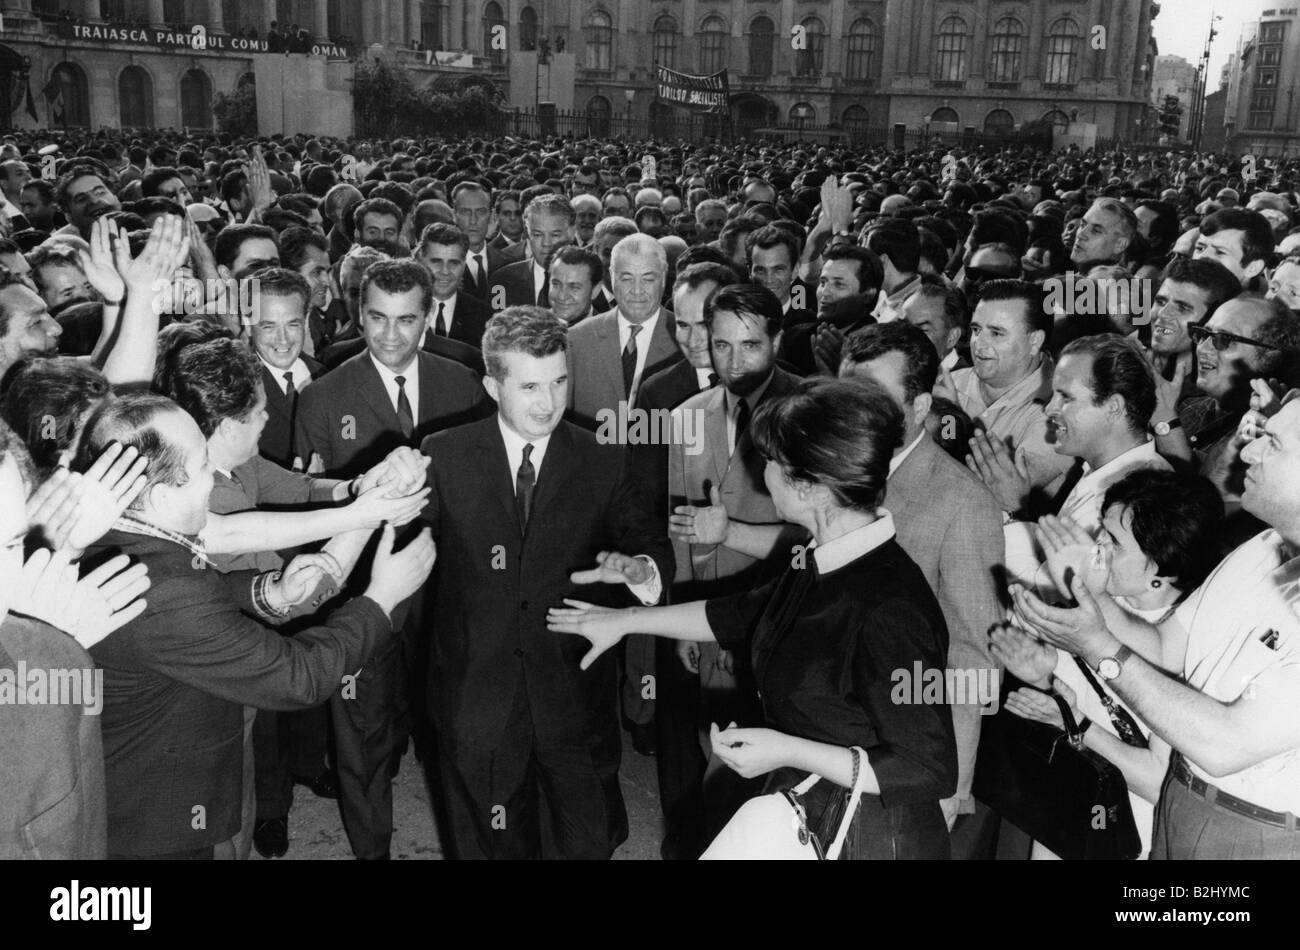 Ceausescu, Nicolae, 26.1.1918 - 25.12.1989, Romanian politician (PCR), President 22.3.1965 - 22.12.1989, bath in the crowd after the 10th congress of the Communist Party, Bucharest, 1970, Stock Photo